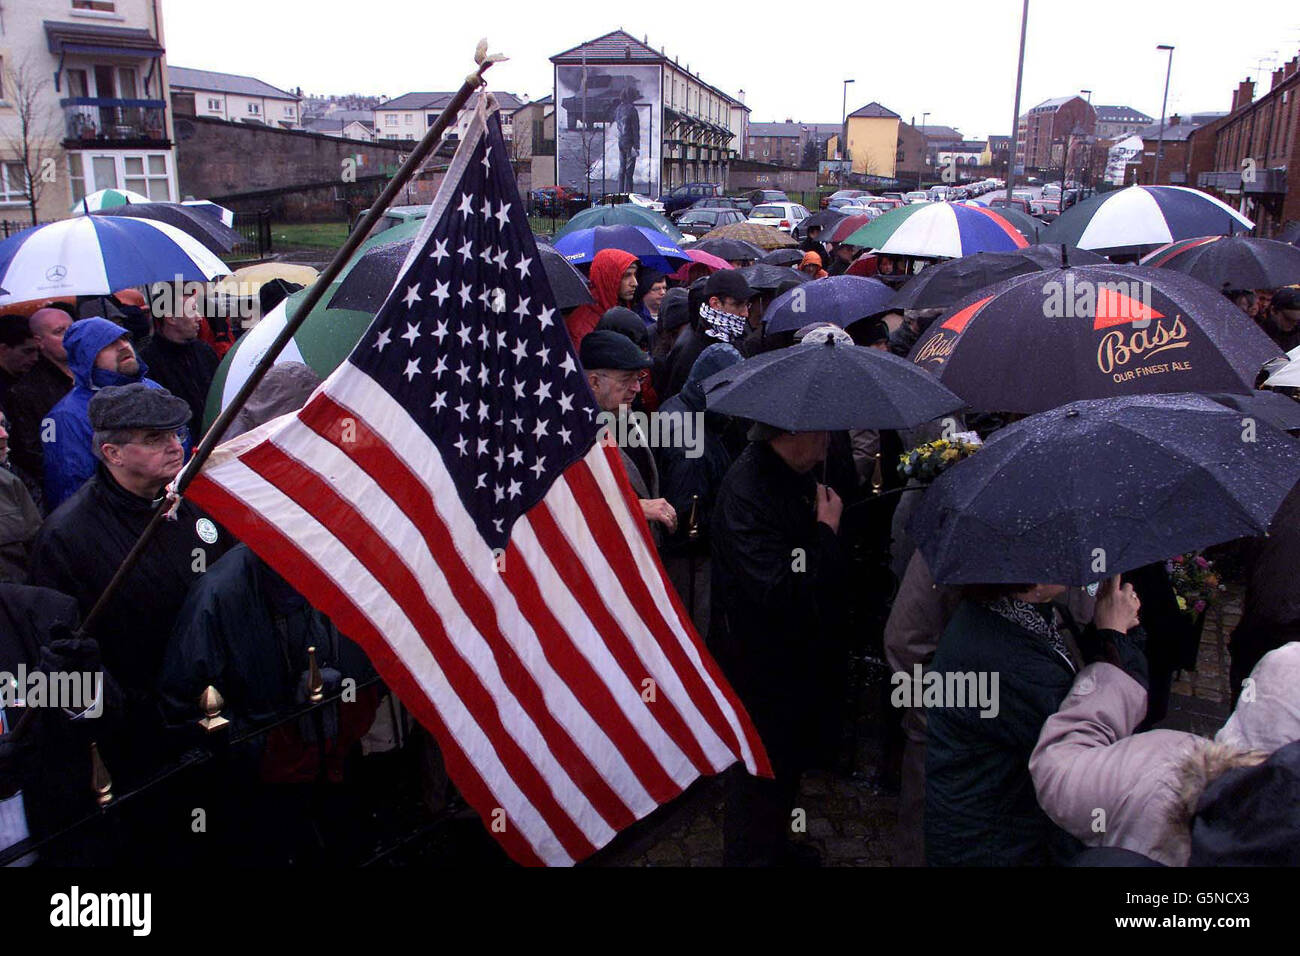 An American flag is waved at the service to mark the 30th anniversary of Bloody Sunday in Londonderry. Thousands of people gathered in Londonderry to retrace the ill-fated route of the Bloody Sunday march in 1972 where 13 people were shot dead. * ... by the Paratroop regiment. Stock Photo